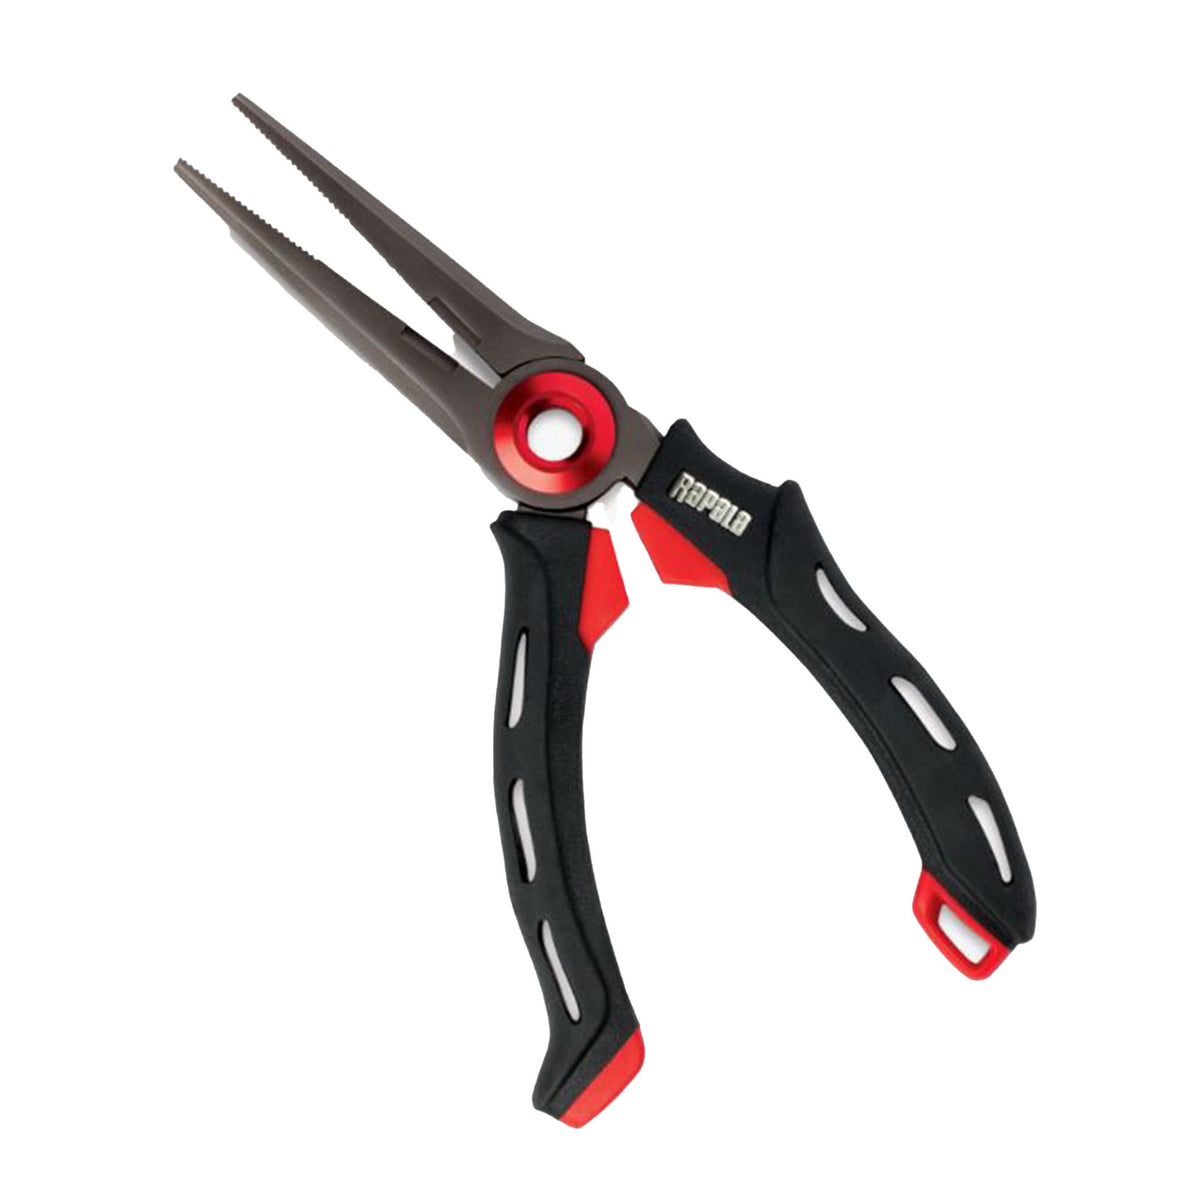 Rapala 8” Mag Spring Needle Nose Pliers